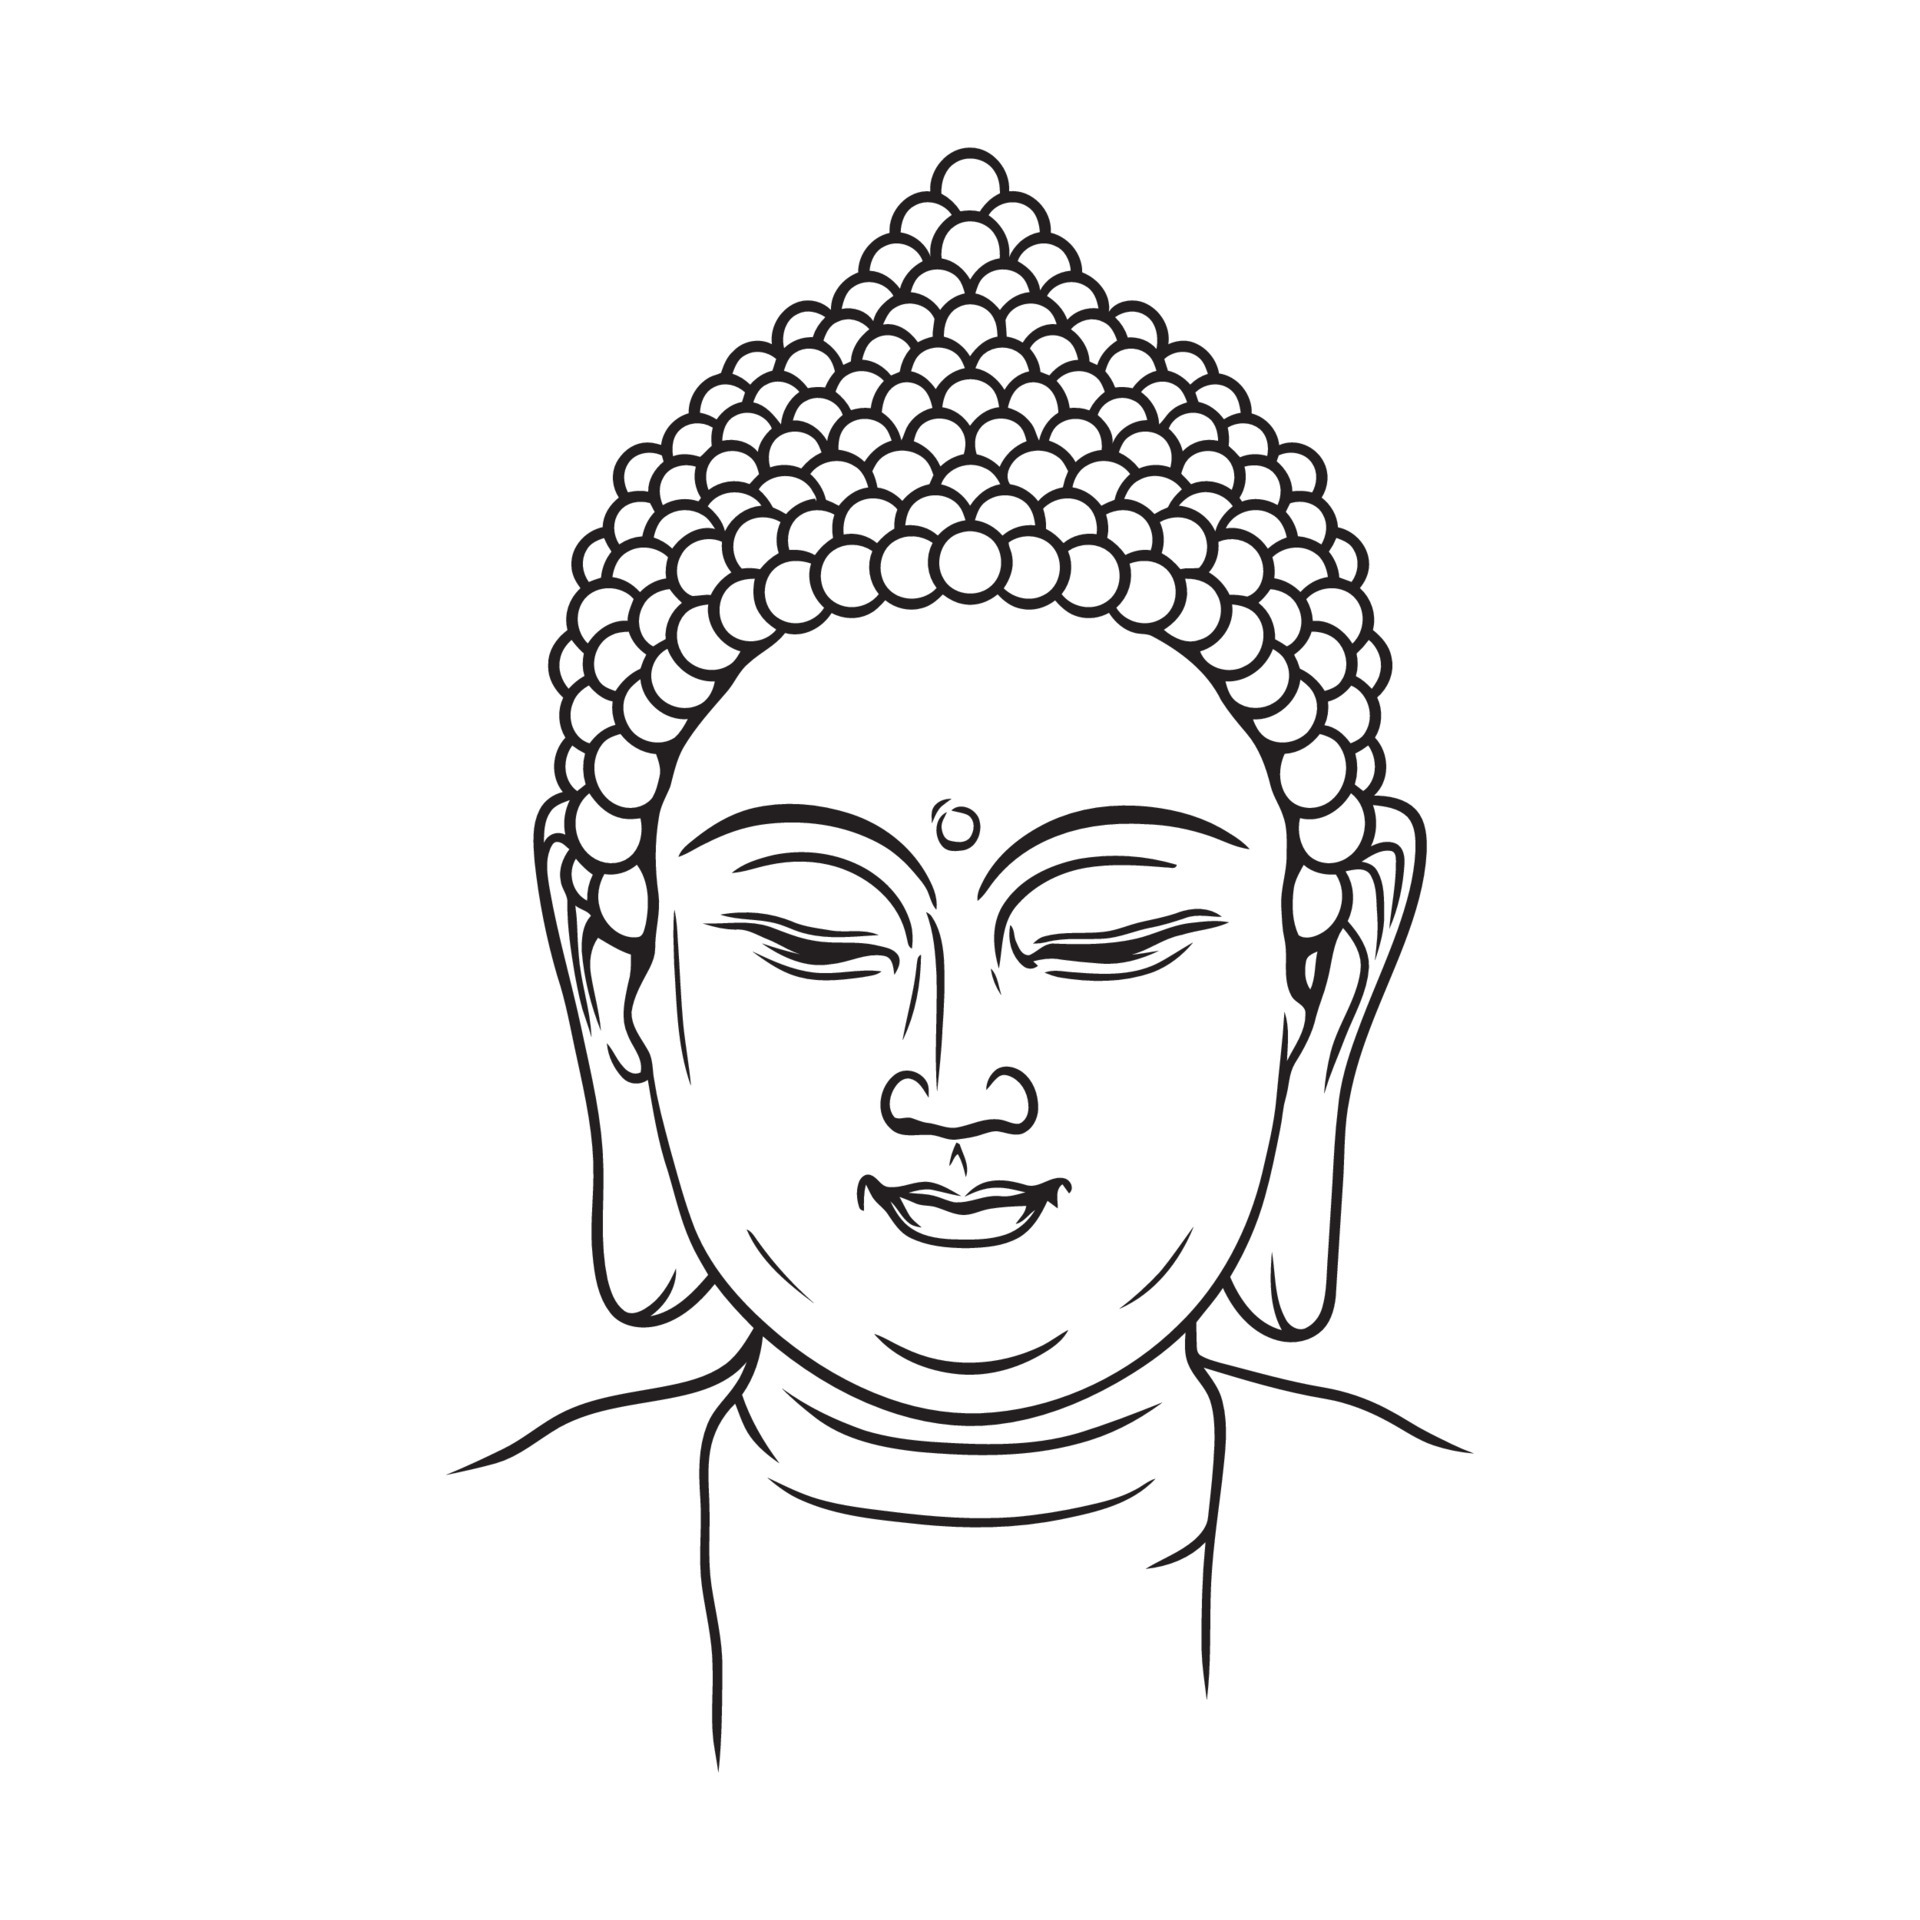 How To Draw Buddha Easy, Step by Step, Drawing Guide, by Dawn - DragoArt